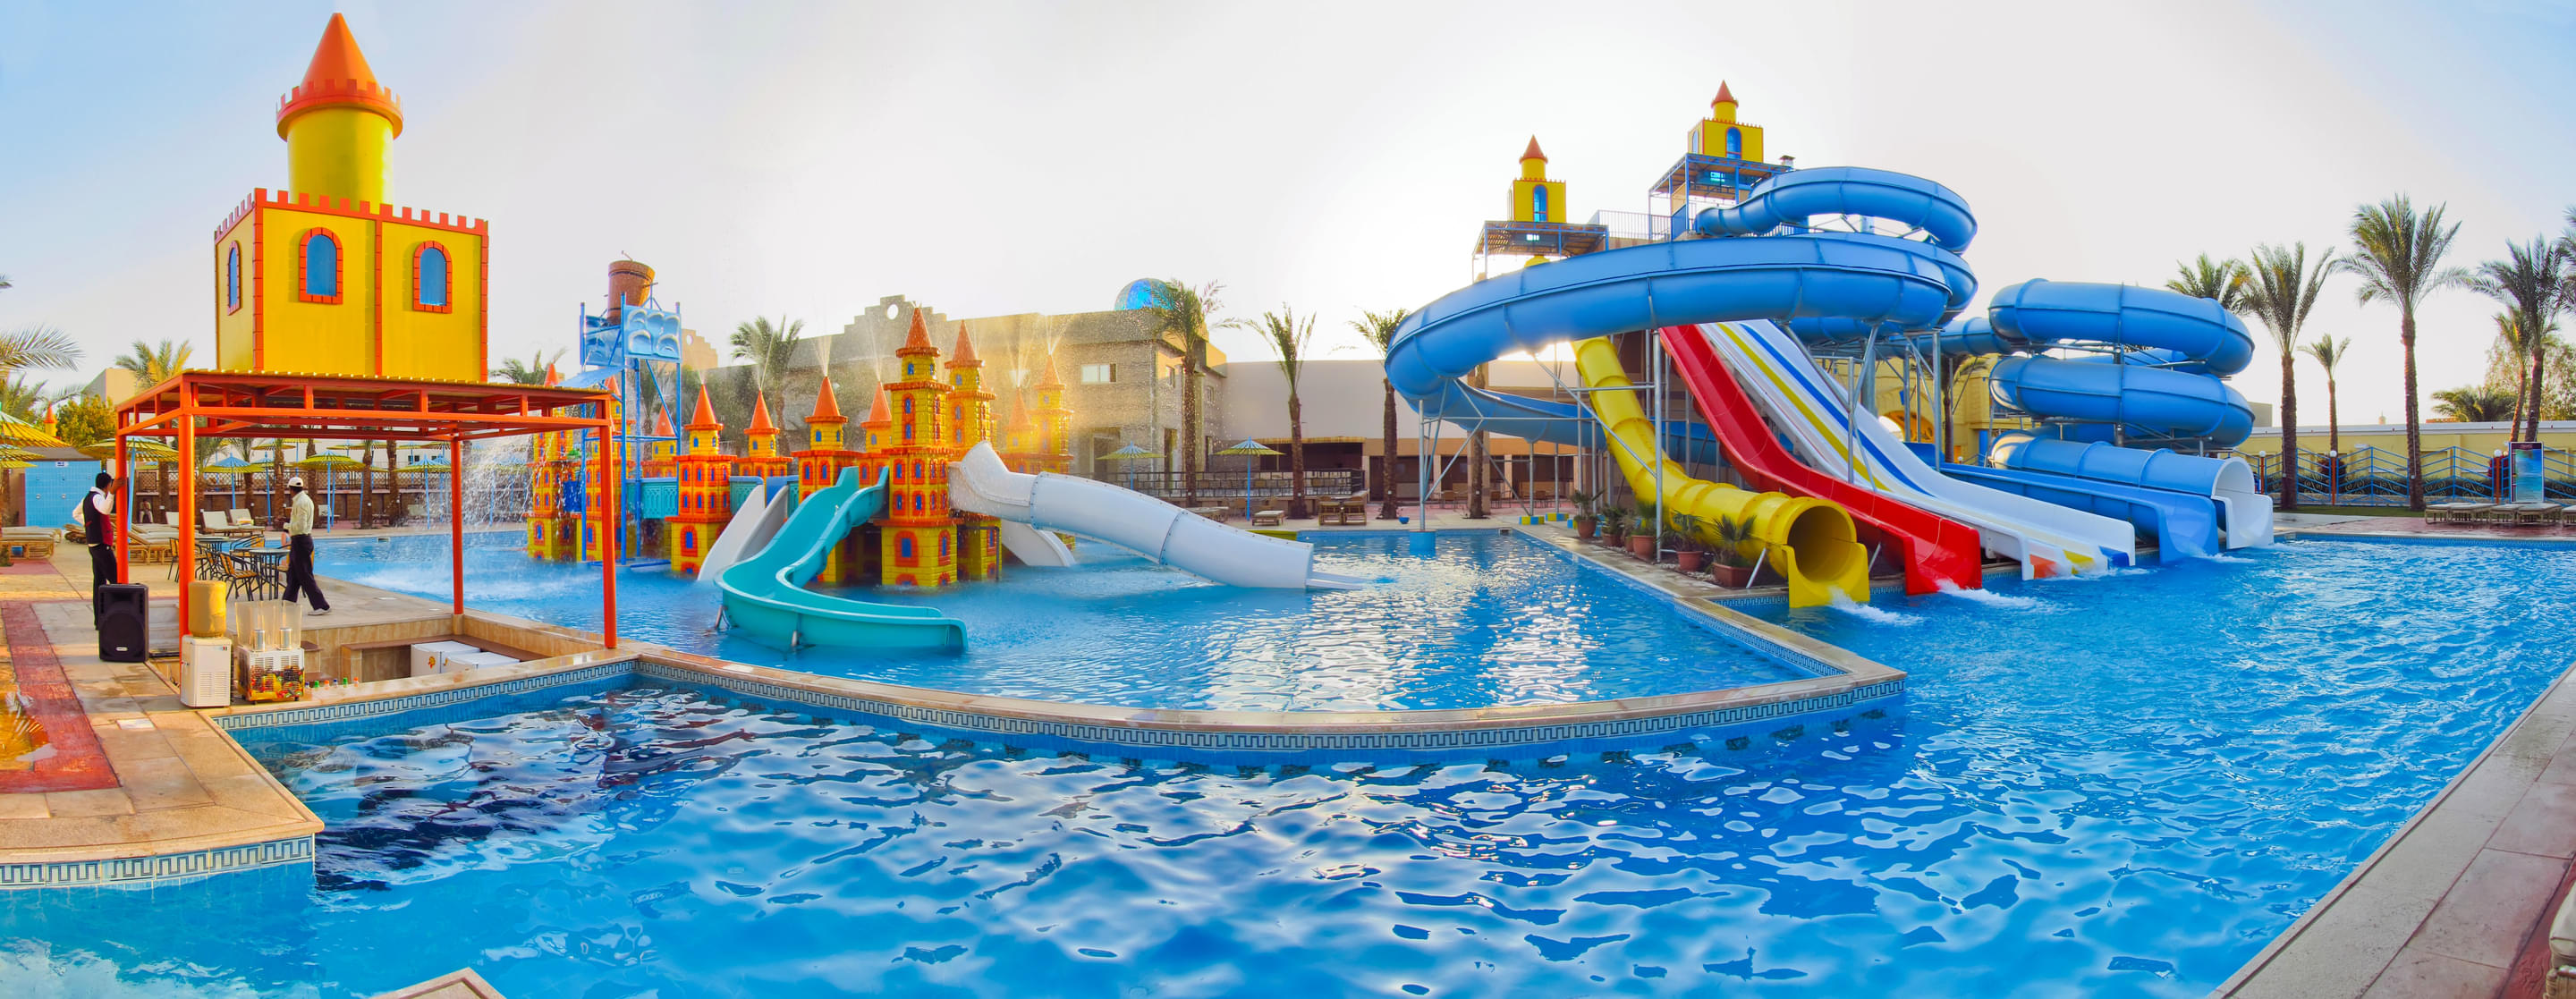 Best Water Parks in Gold Coast